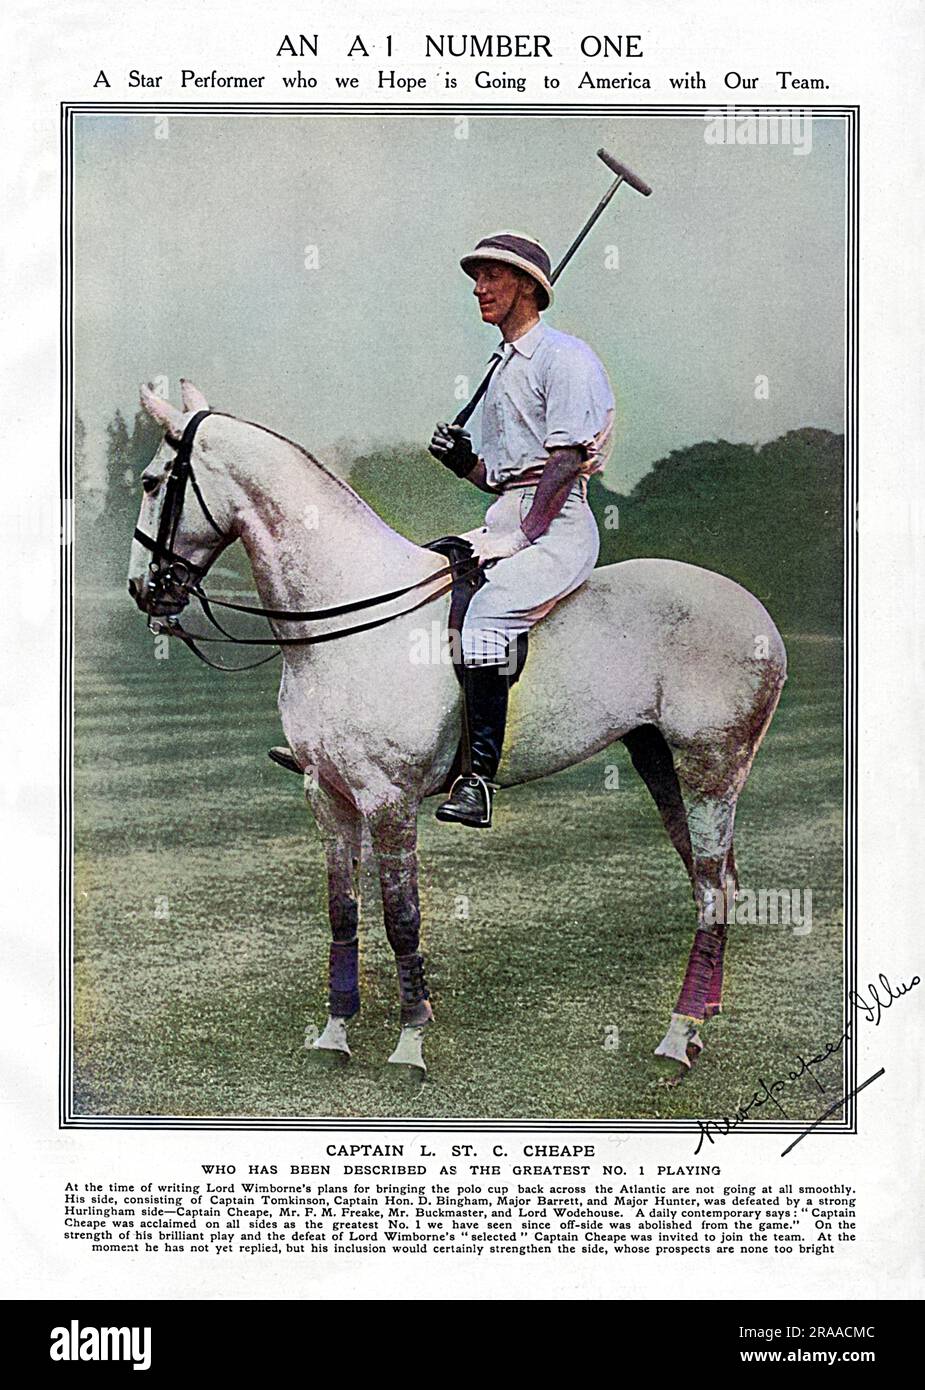 Captain Leslie St. Clair Cheape (1882-1916), British soldier and polo player dubbed, 'England's greatest polo player'. He played for England in the Westchester Cup three times in 1911, 1913 and 1914. He was killed on 23 April 1916 while commanding a squadron of the Worcestershire Yeomanry in Egypt.  Pictured in The Tatler in 1914, and described as 'a star performer who we hope is going to American with our team.' Cheape did go and was pivotal in helping England win their historic victory over their American rivals in the International Polo Trophy (Westchester Cup), despite being impeded by bro Stock Photo